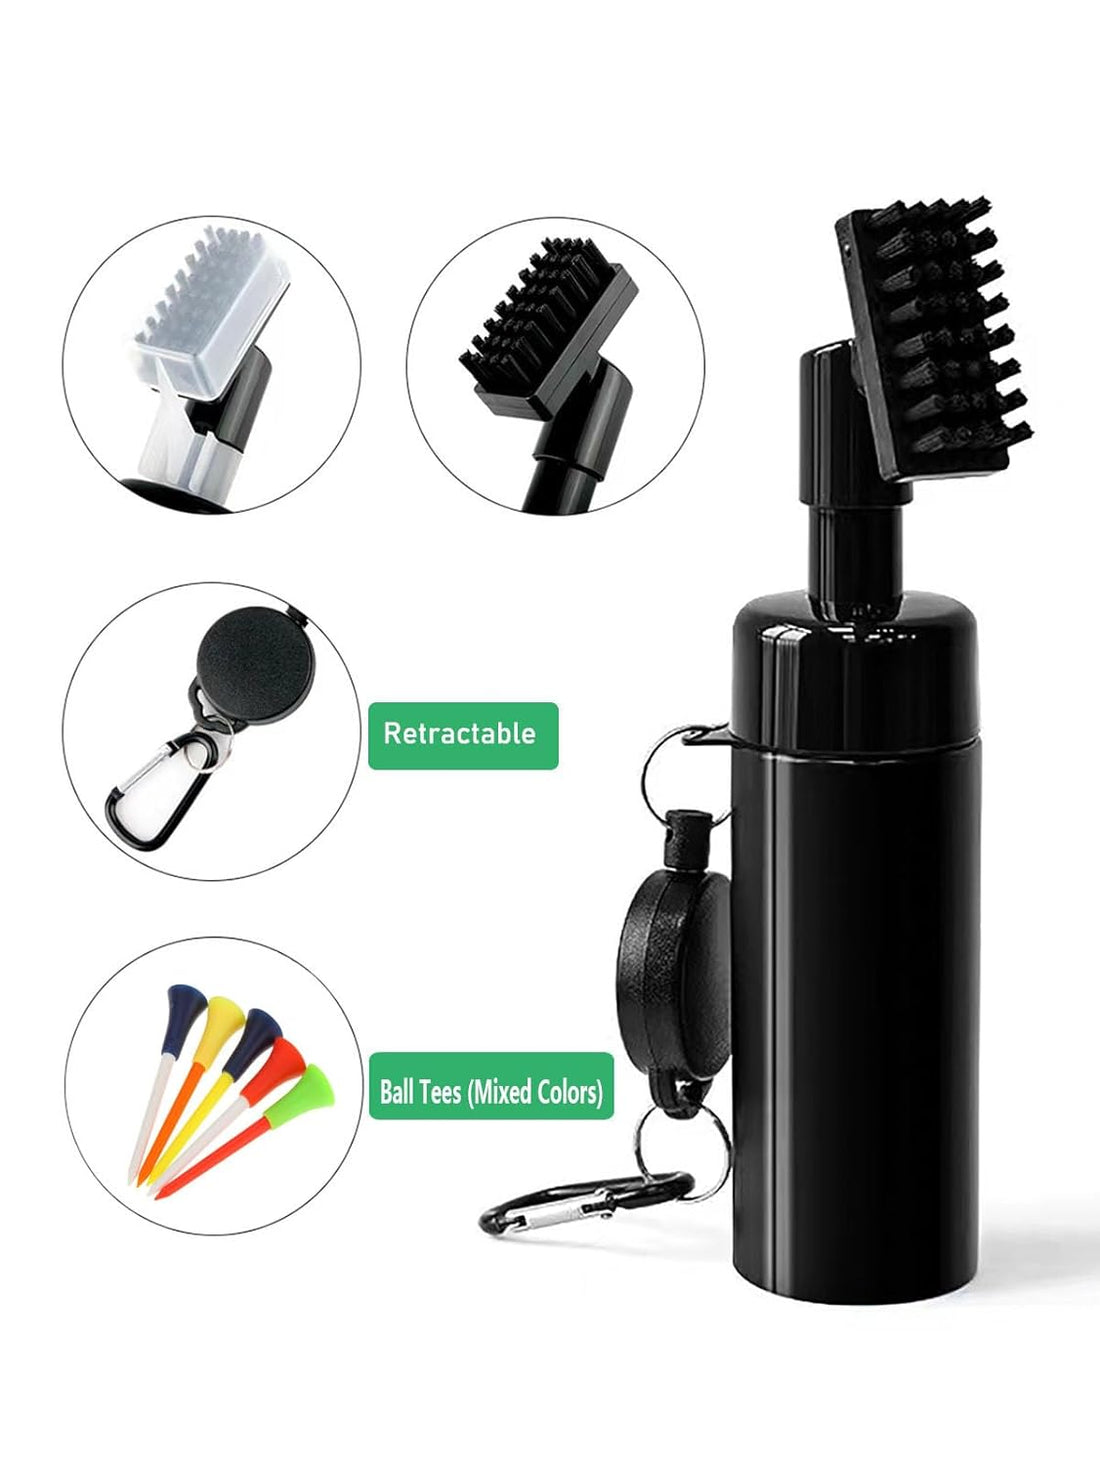 Golf Club Cleaner Brush Set, Spray Golf Water Brush, Retractable Golf Club Cleaner Brush with 2.5ft Retractable Zip-Line & Golf Ball Tees & Squeeze Water Bottle 7.5'' Holds 5oz of Water, Gift for Men